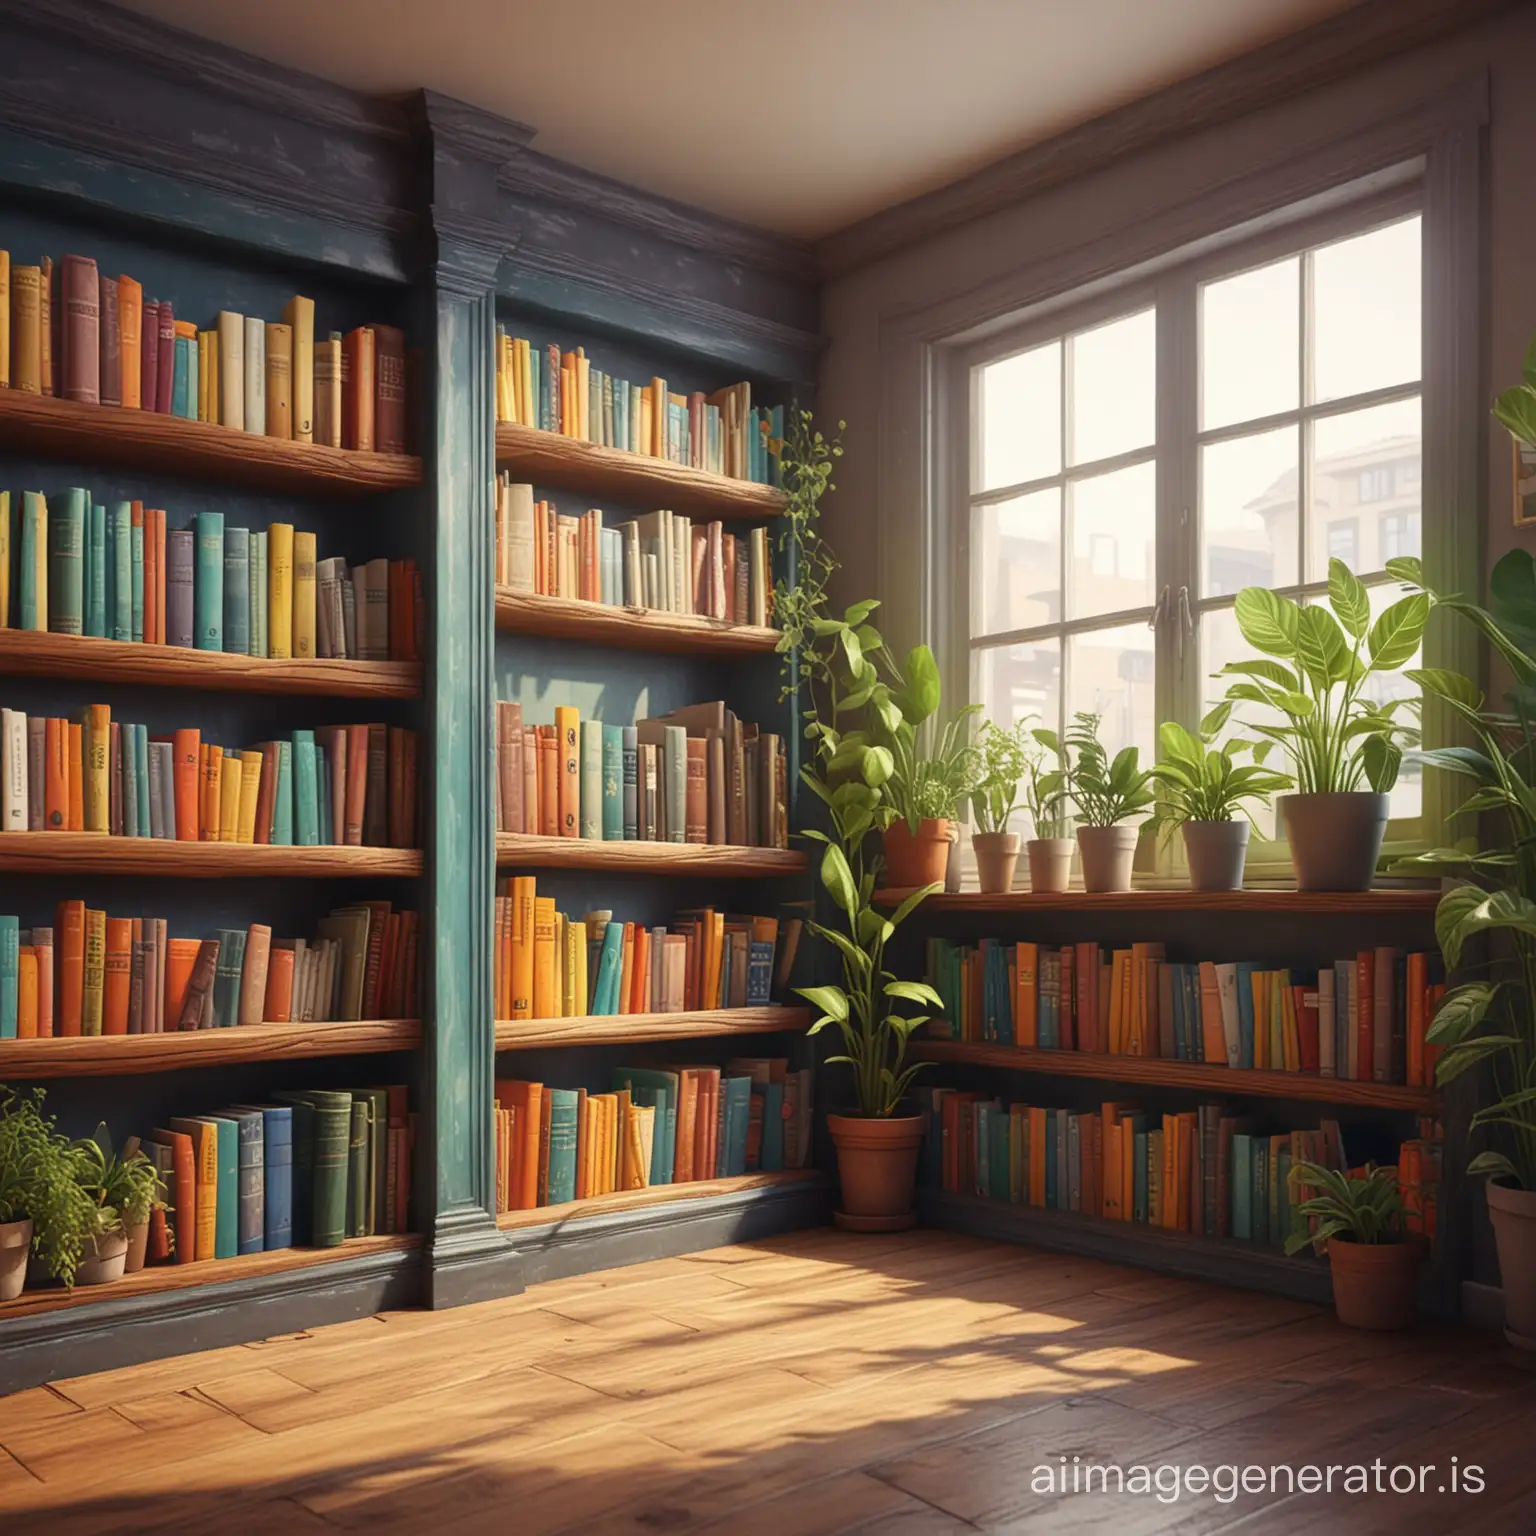 Quaint-Old-Bookshop-Interior-with-Colorful-Books-and-Cartoon-Elements